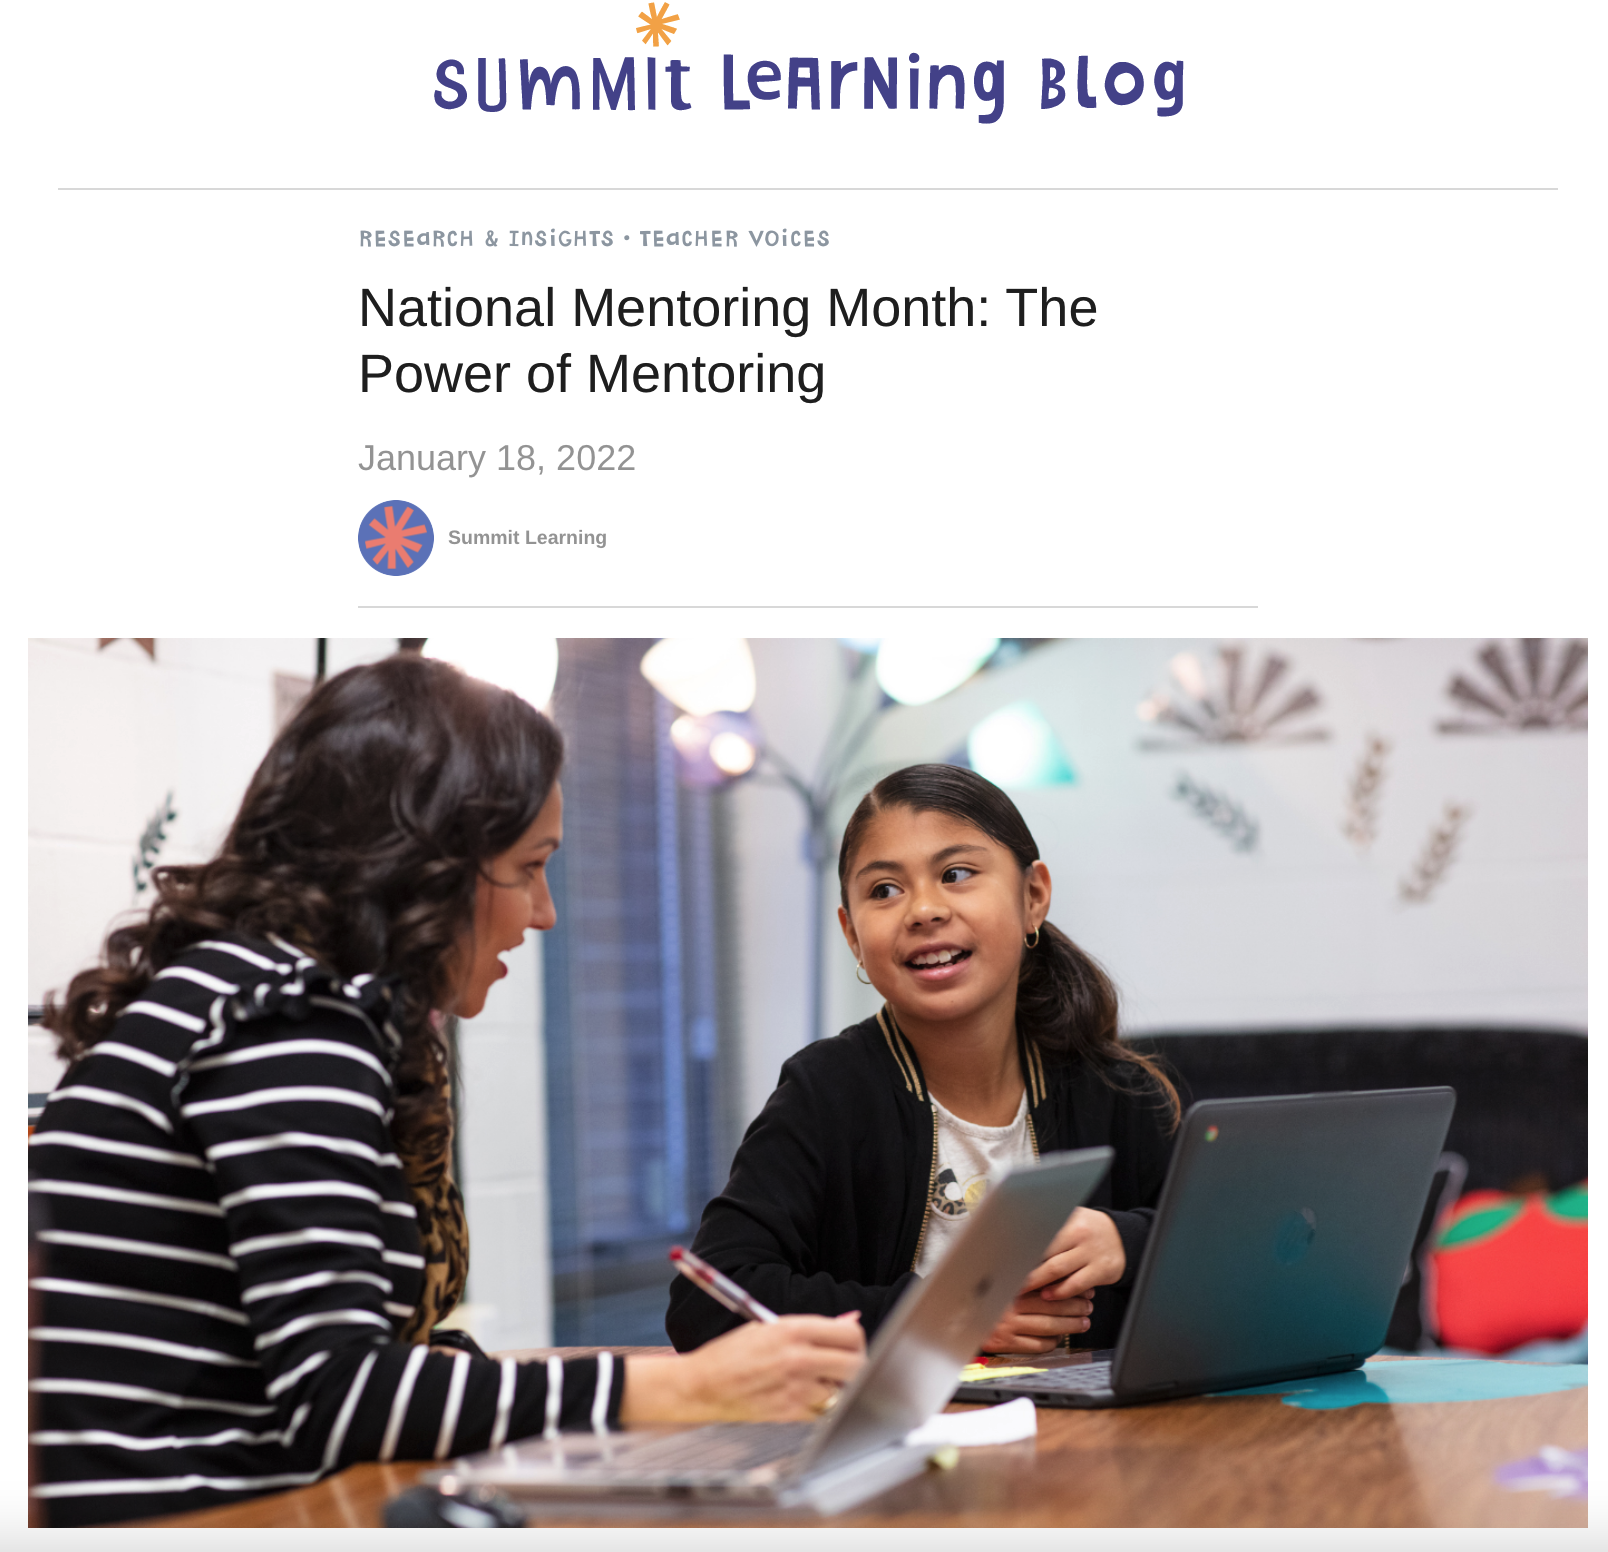 National Mentoring Month: The Power of Mentoring